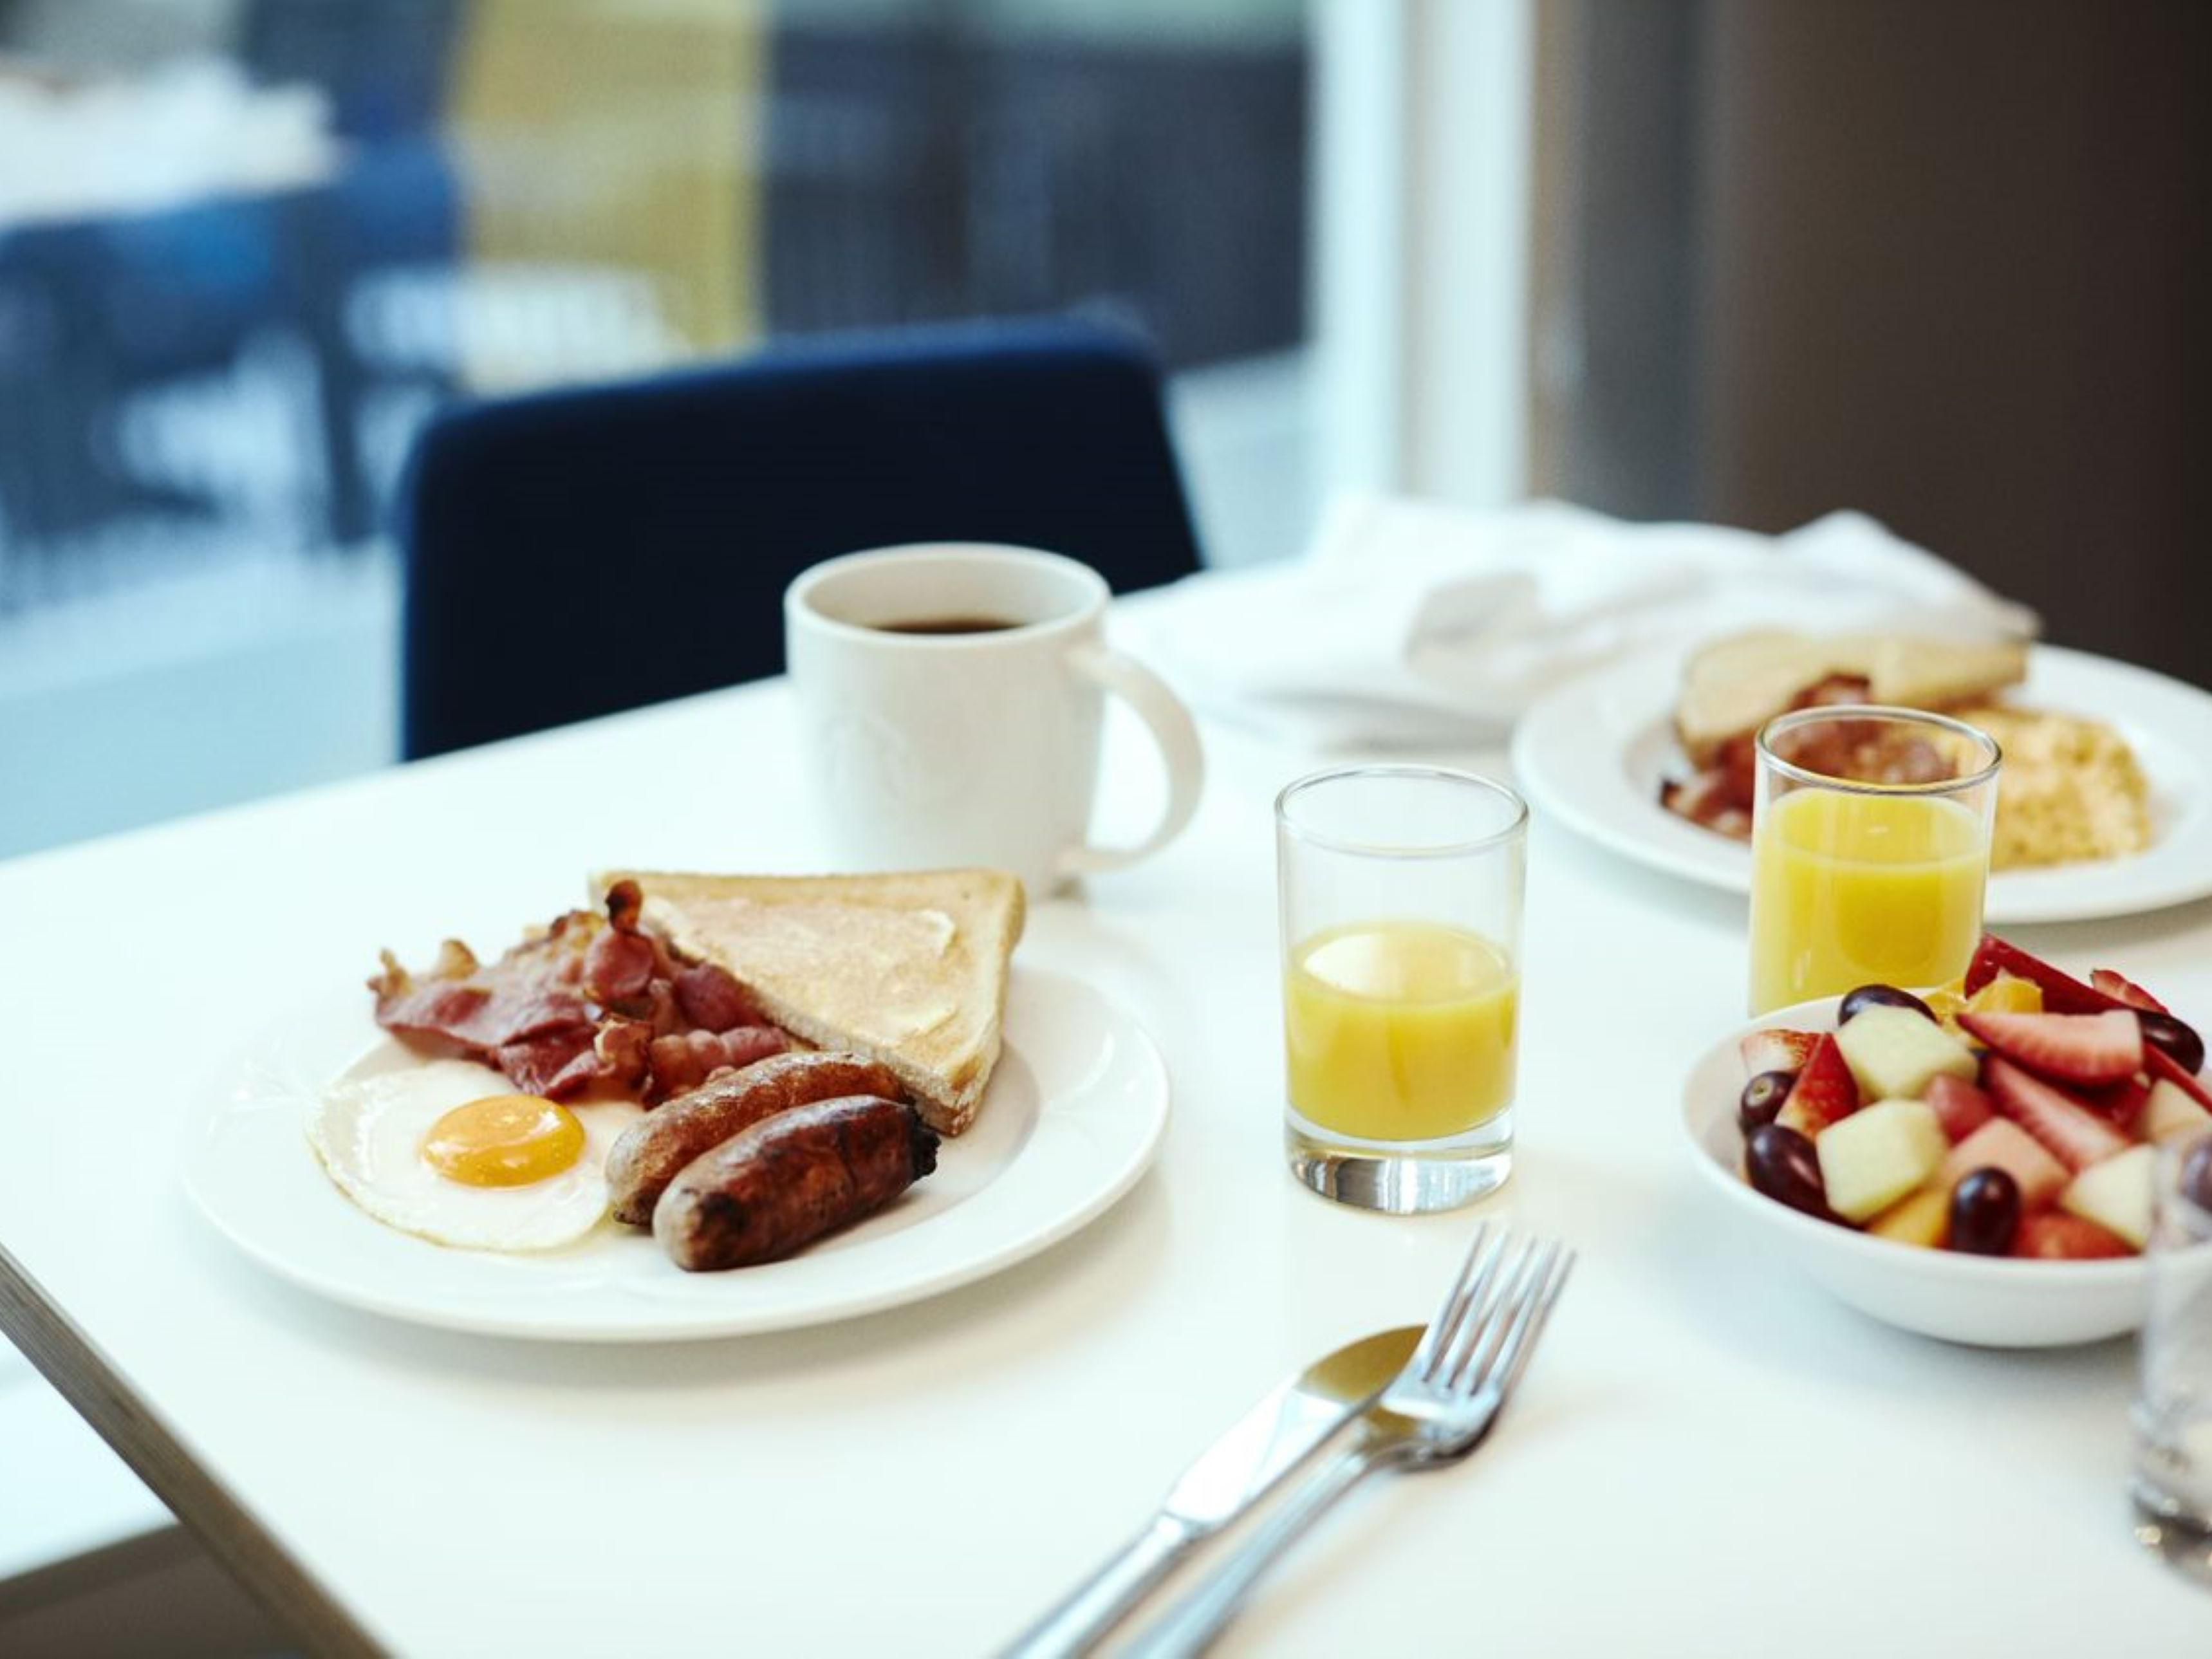 Start the day with our breakfast served daily, featuring a range of delicious hot and cold items -- sure to please everyone!
